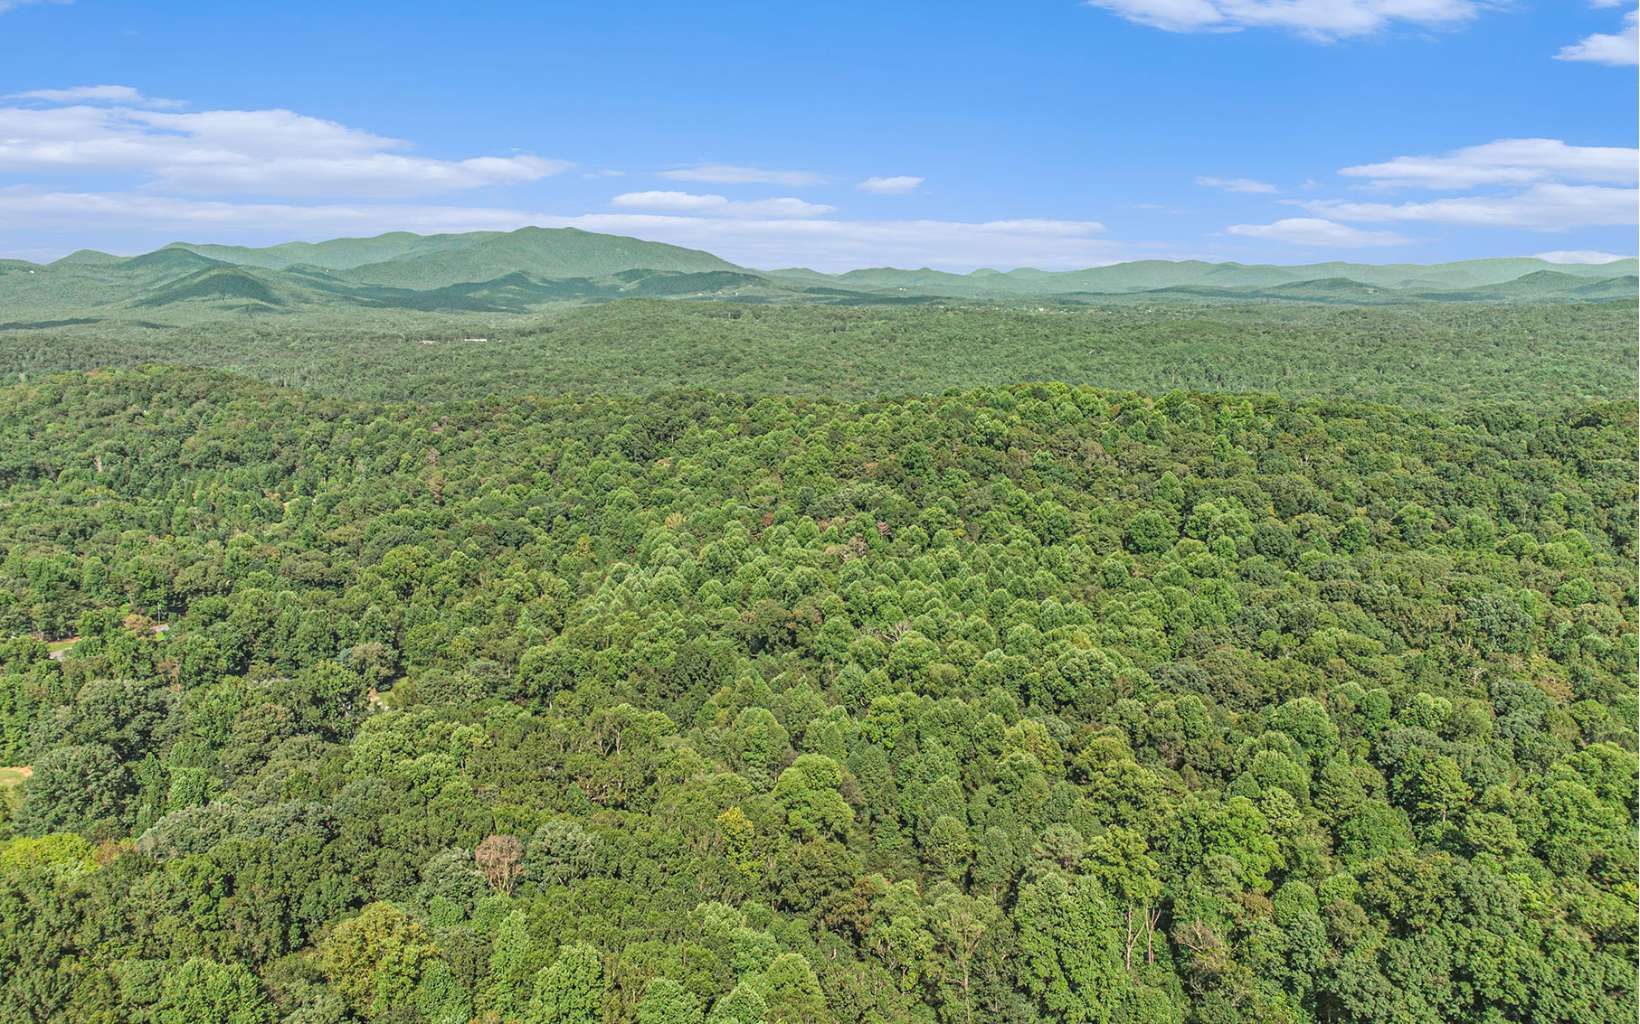 54+ Unrestricted acres within 5 miles of town on all paved roads with public water. This gorgeous tract features rolling acreage with long range views, meandering creek frontage, and overlooks a beautiful pasture. Can be accessed from Hickory Ridge Road or Yukon. Perfect for development or your own private retreat. Additional Lots available by same seller at top of Hickory Ridge Development.